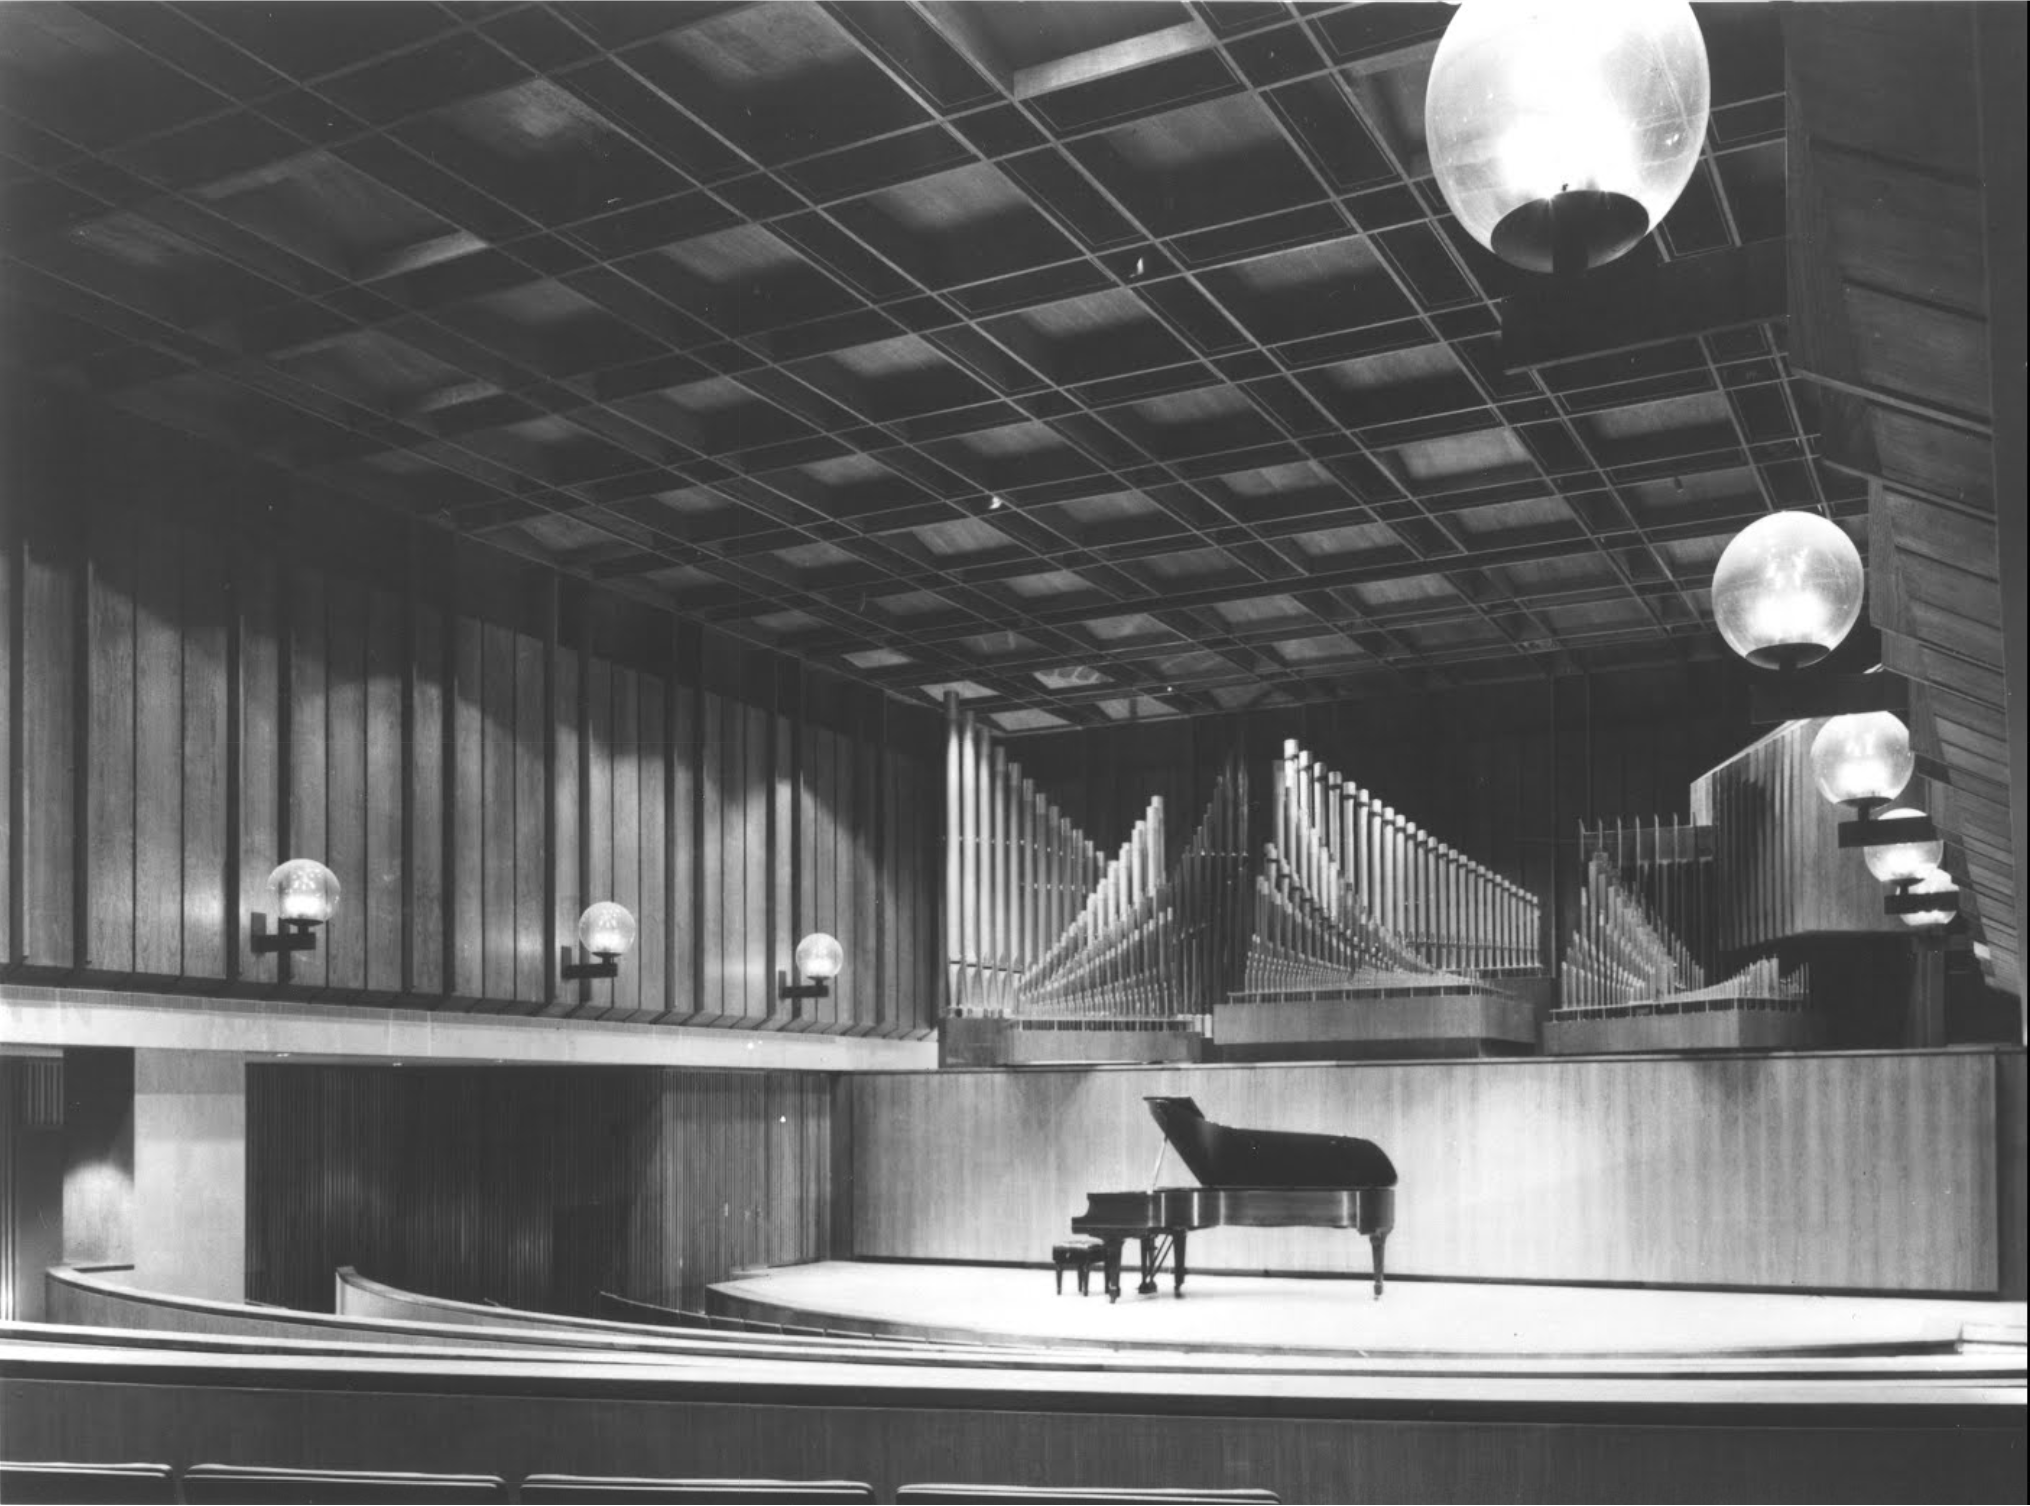 Paul Recital Hall in Juilliard. Installed in this hall, which seats 277, is the Holtkamp organ. 